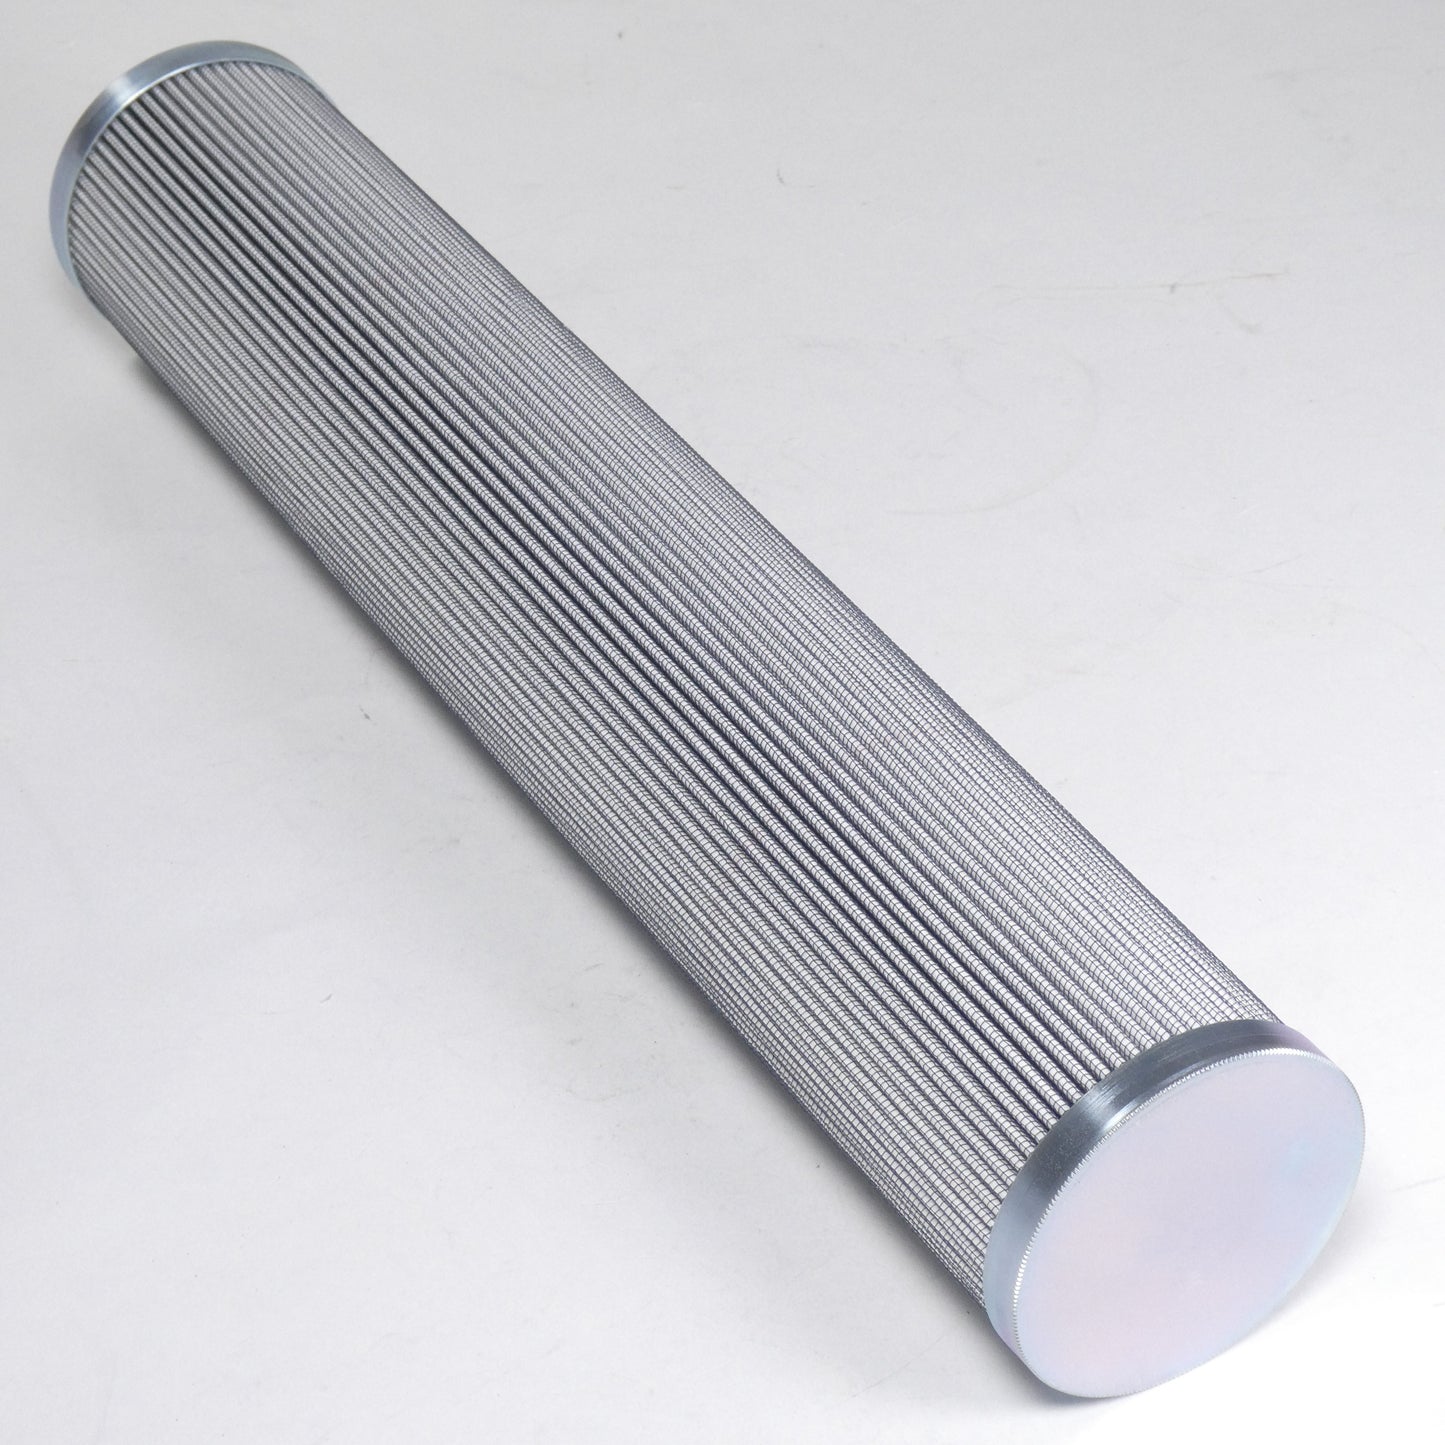 Hydrafil Replacement Filter Element for Finn FC7008A003BS